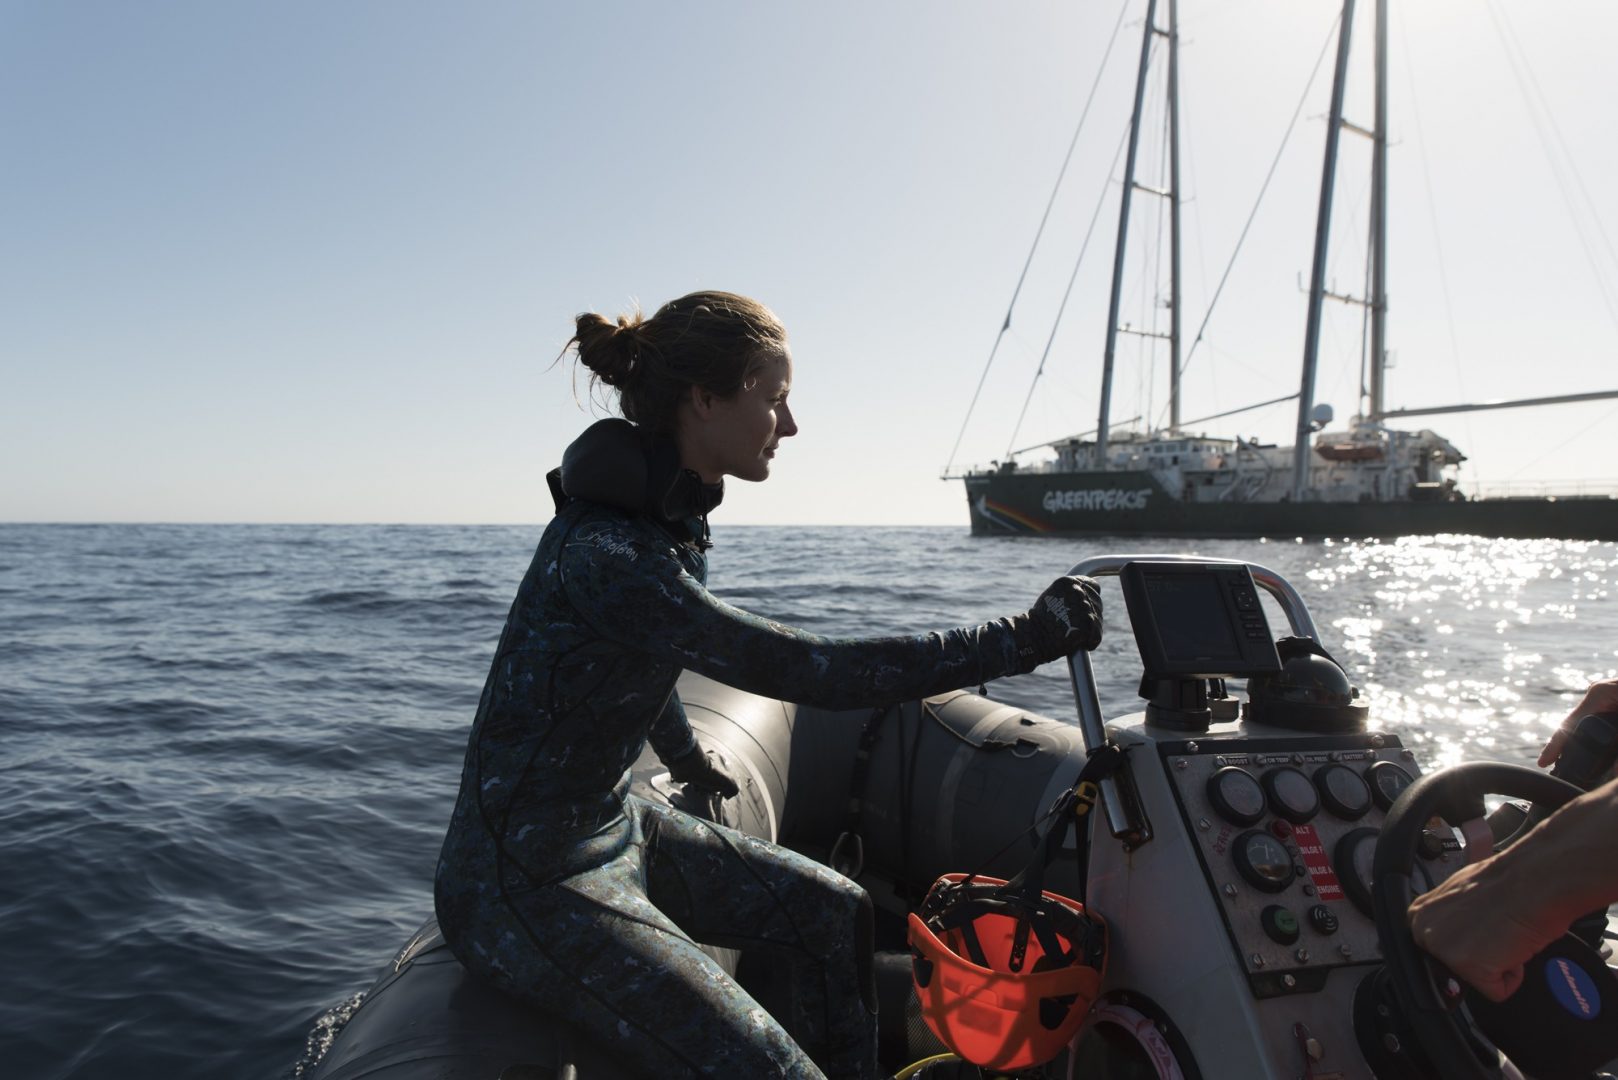 Underwater photographer Mikaela Skovranoa heading back to the Rainbow Warrior III after a dive in the Great Australian Bight